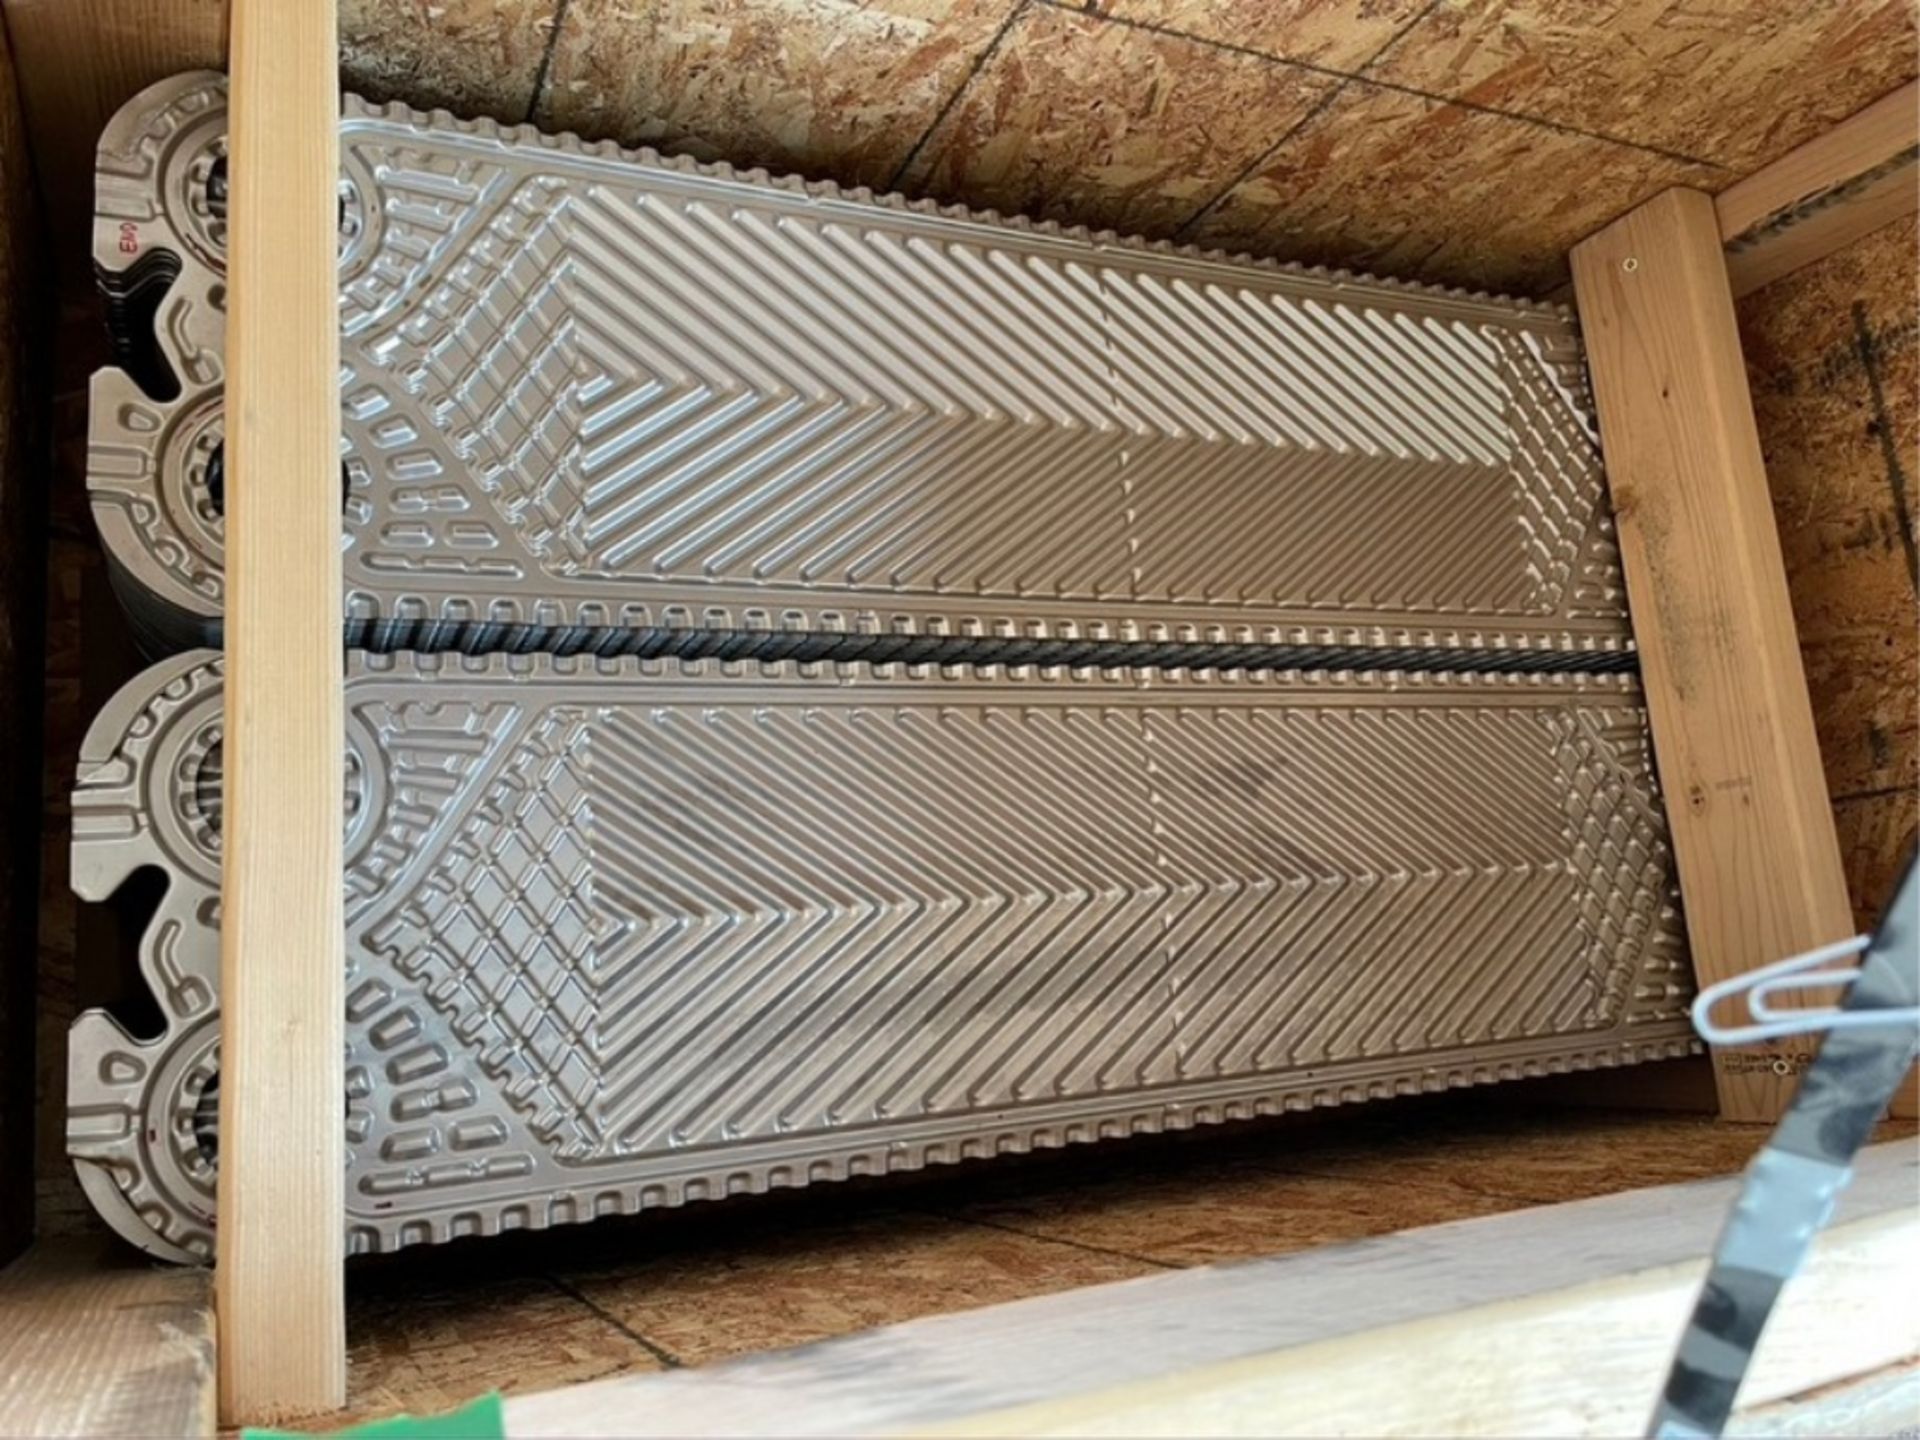 SPARE HEAT EXCHANGER PLATES APPX 150 IN (2) CRATES (RIGGING, SITE MANAGEMENT AND LOADING FEE $40.00) - Image 5 of 8